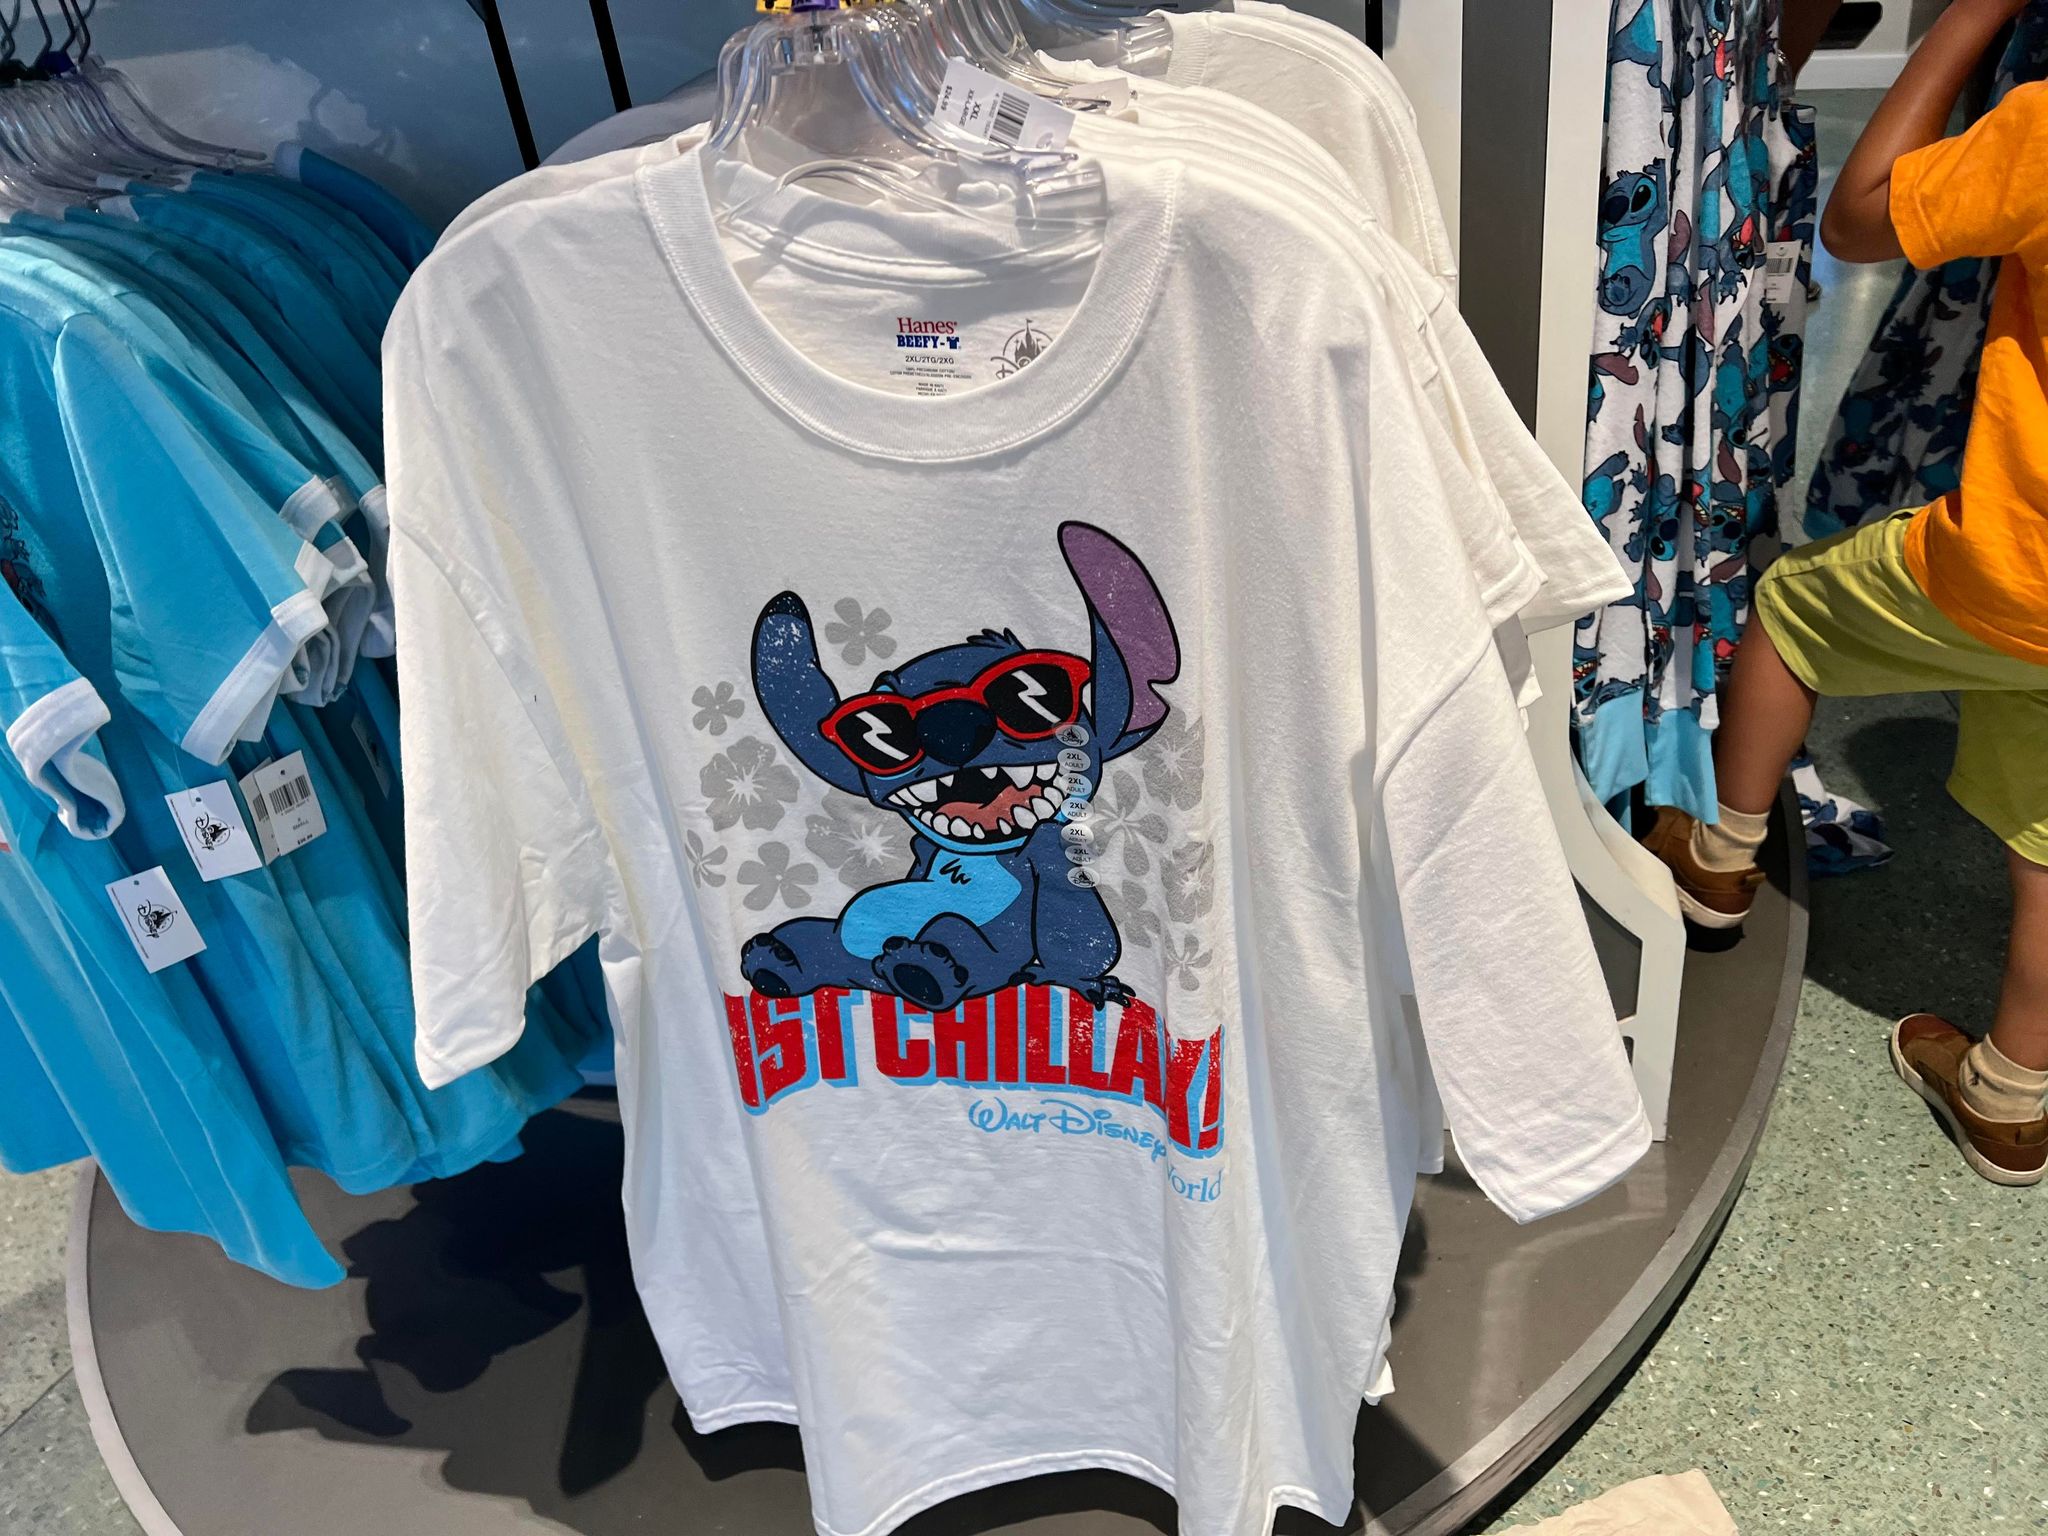 This Is Not A Test. Experiment 626 Has Been Spotted At Star Traders. Stitch is on the loose! Magic Kingdom 3